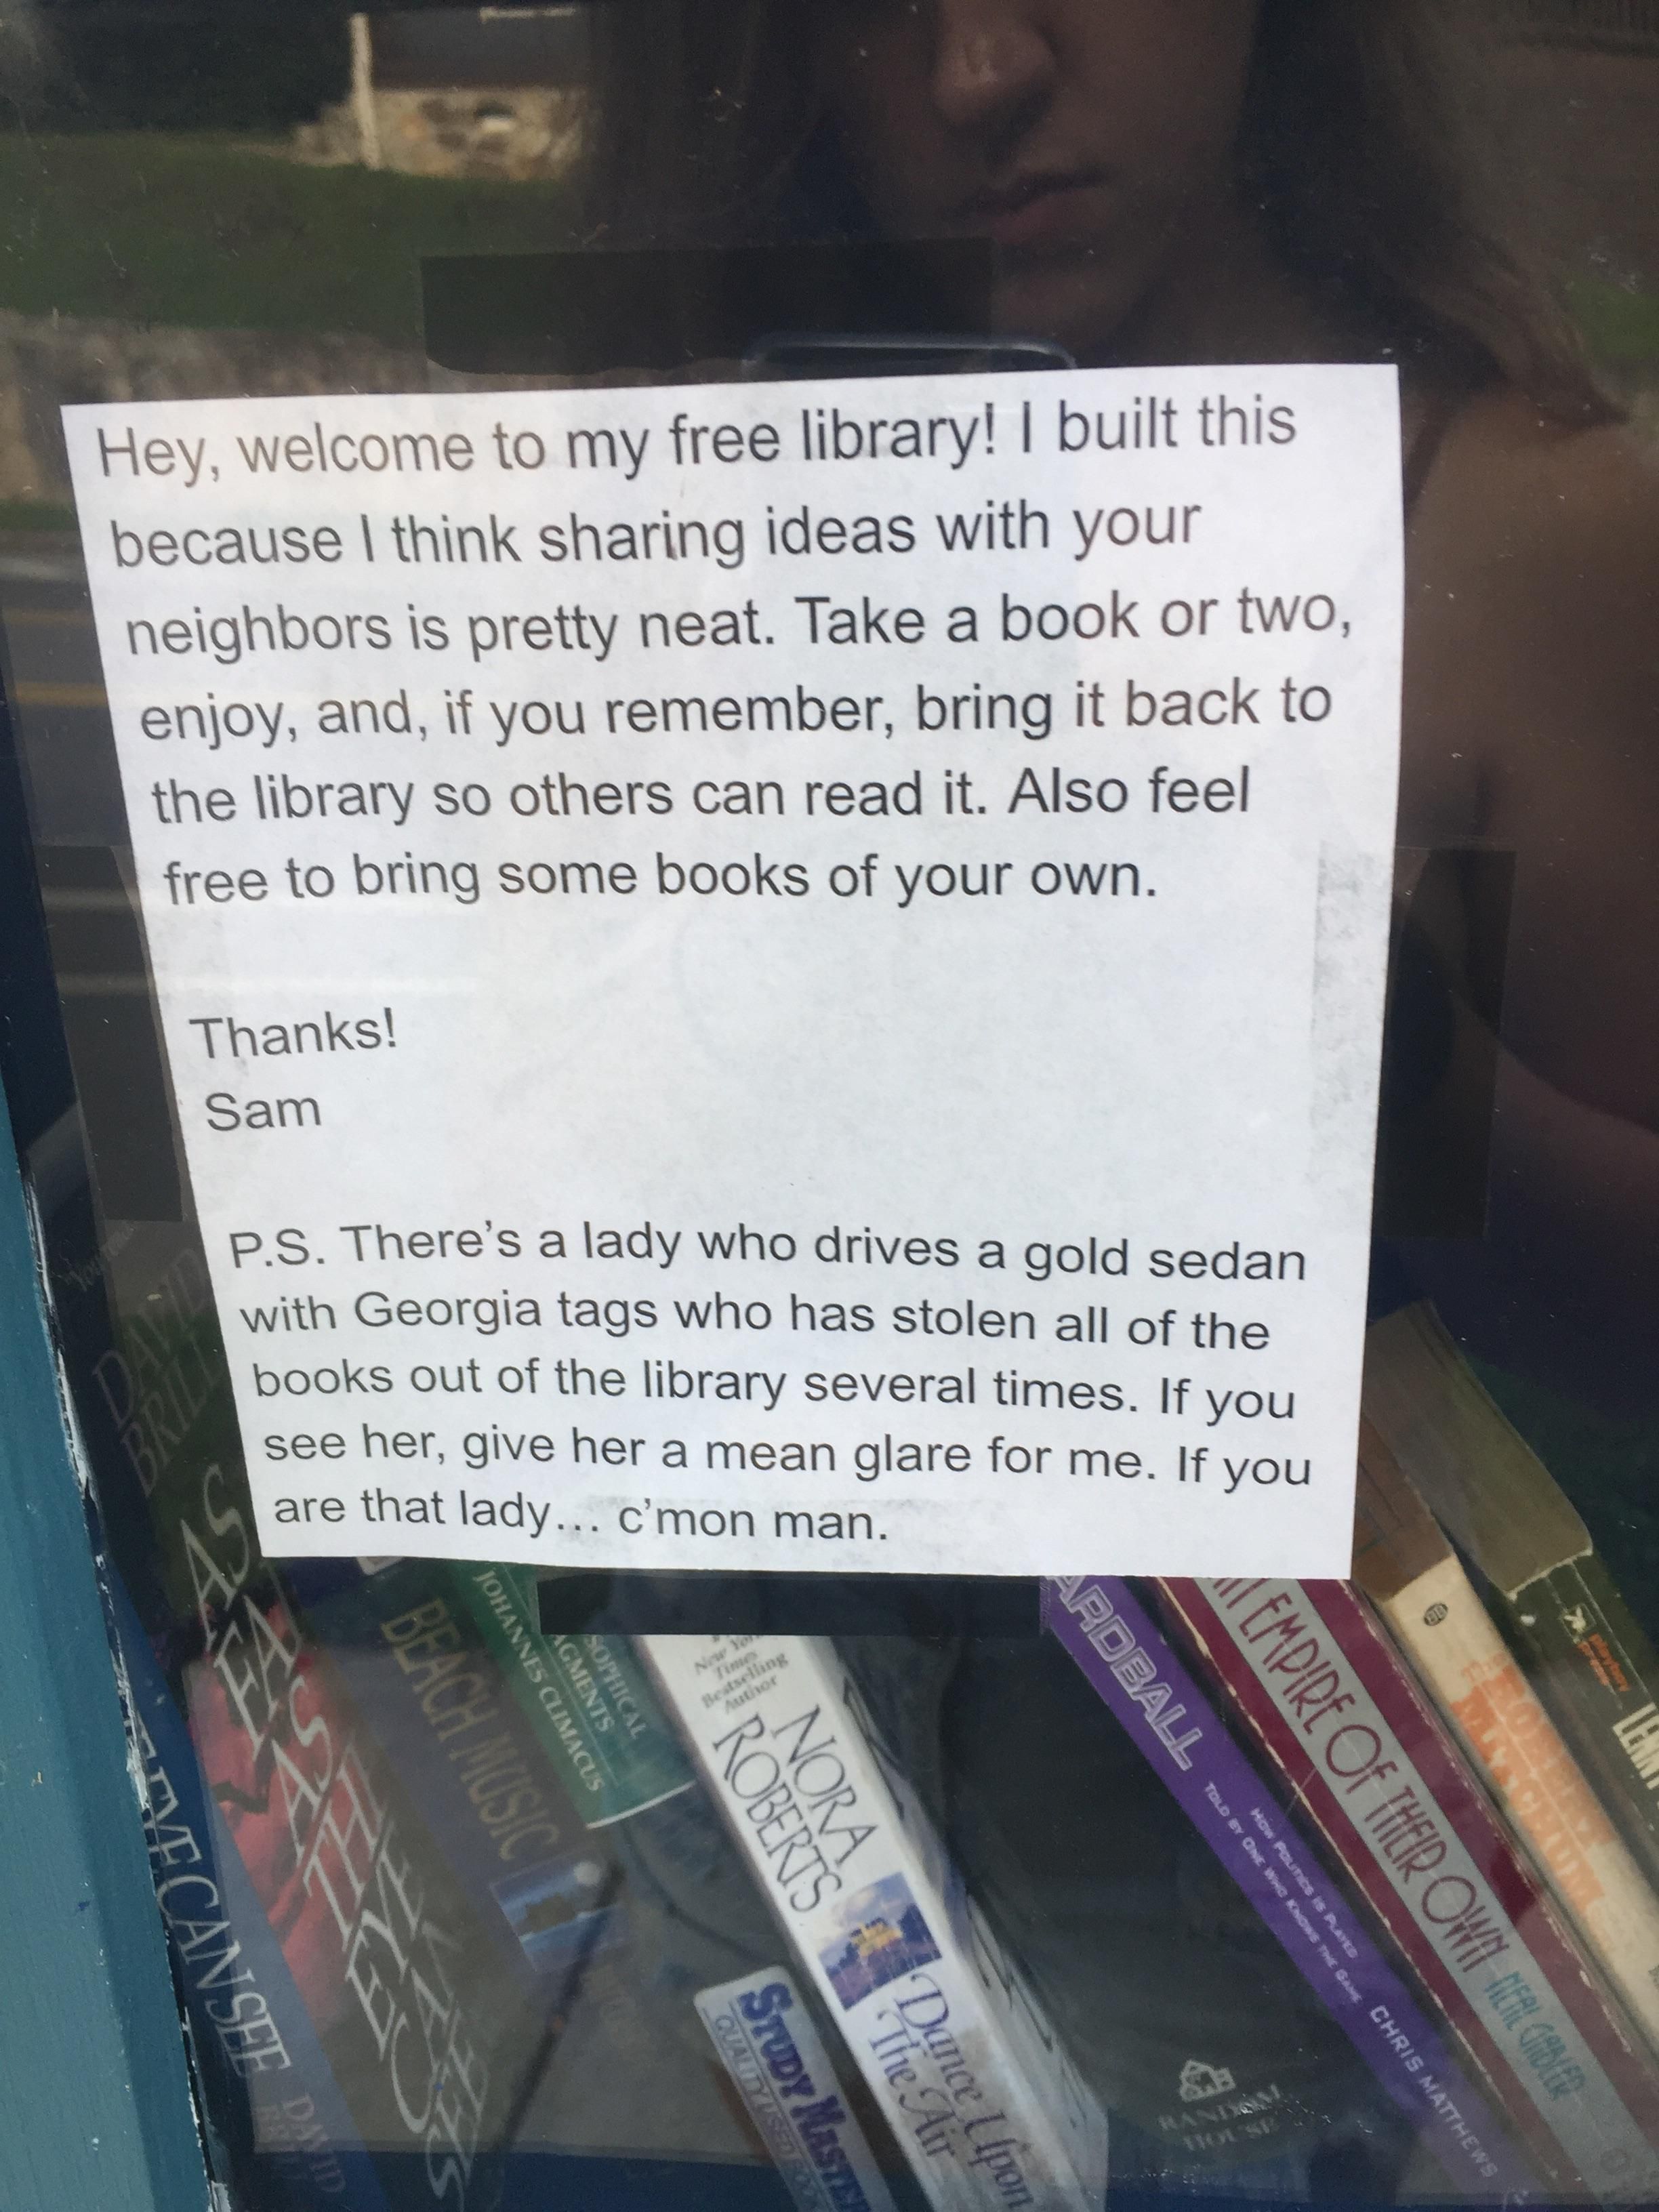 The ending to this note on the little library in my neighborhood definitely takes a turn